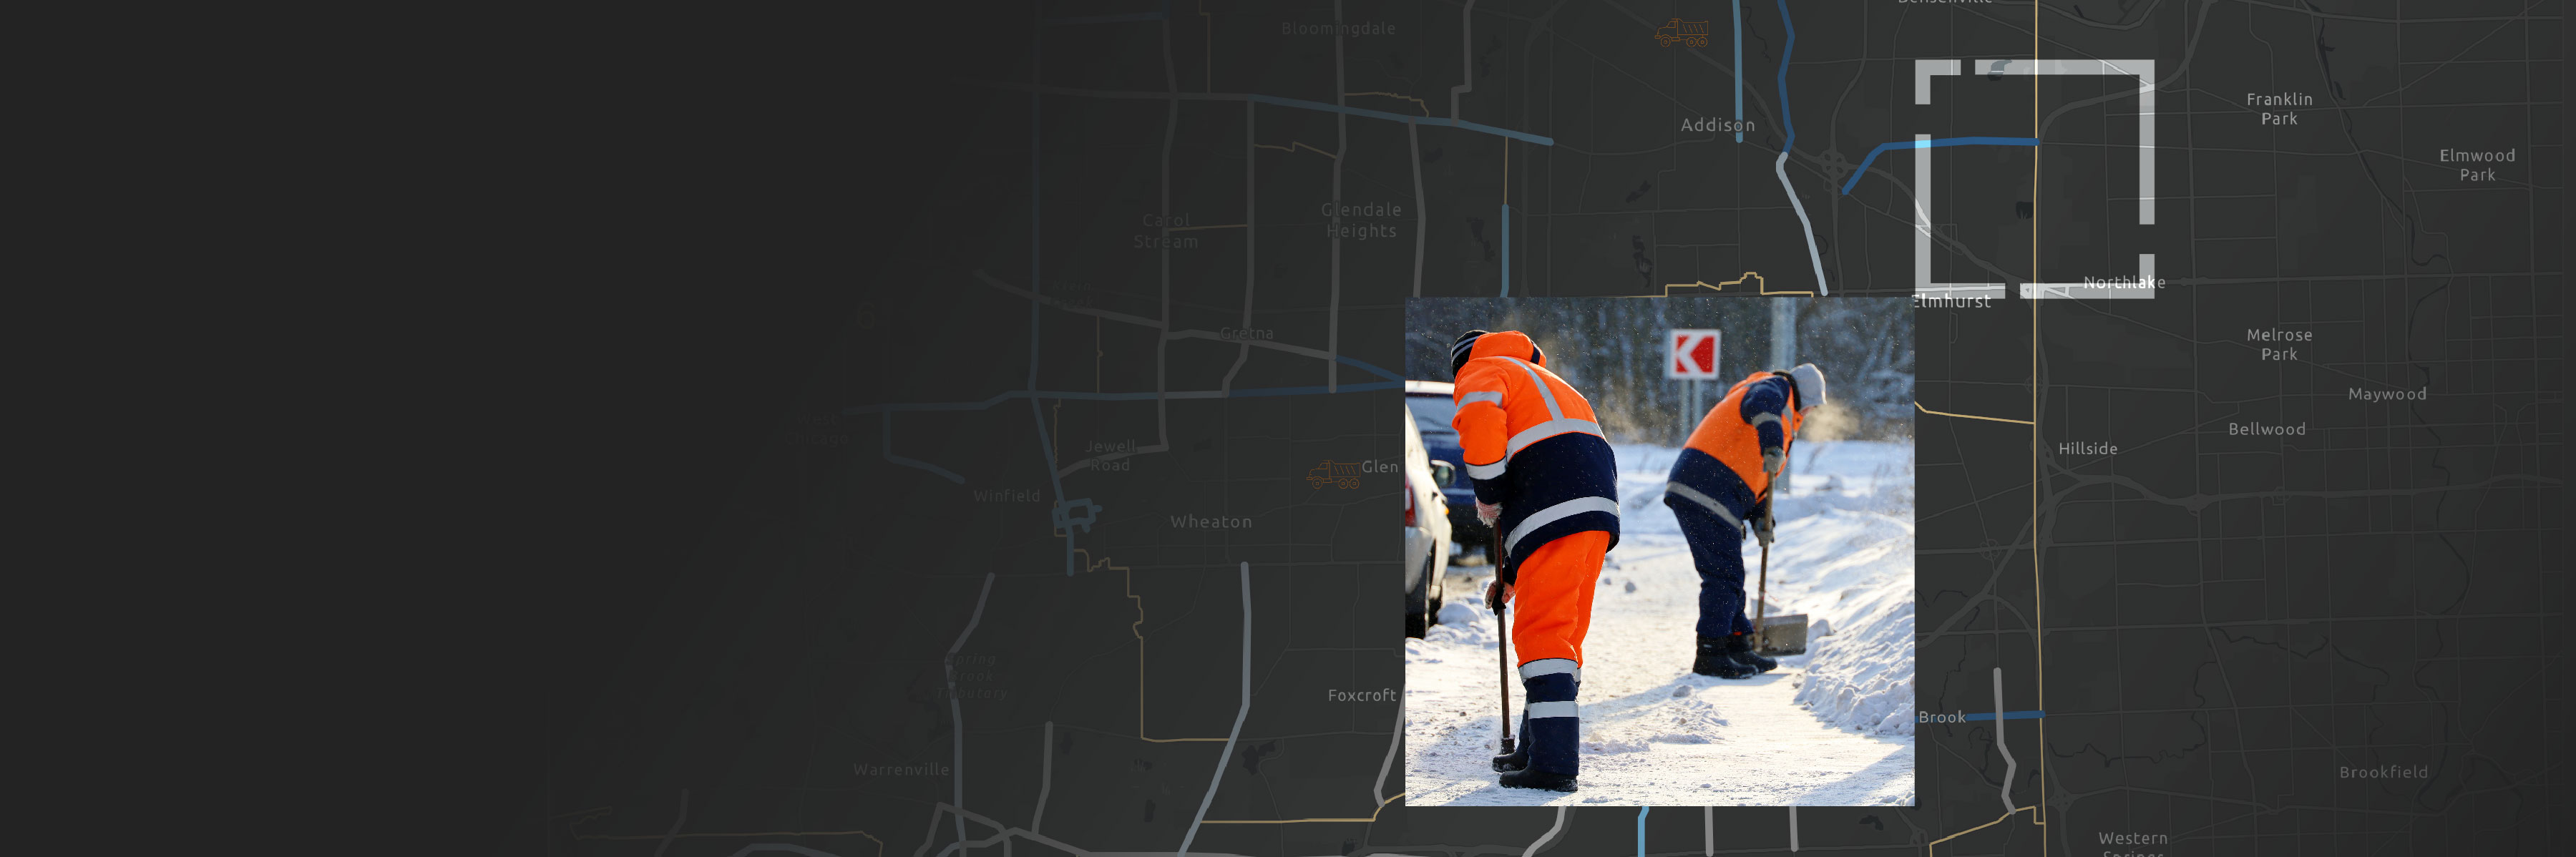 Two people in orange safety gear shoveling snow by a roadside with a background of a large dark gray map